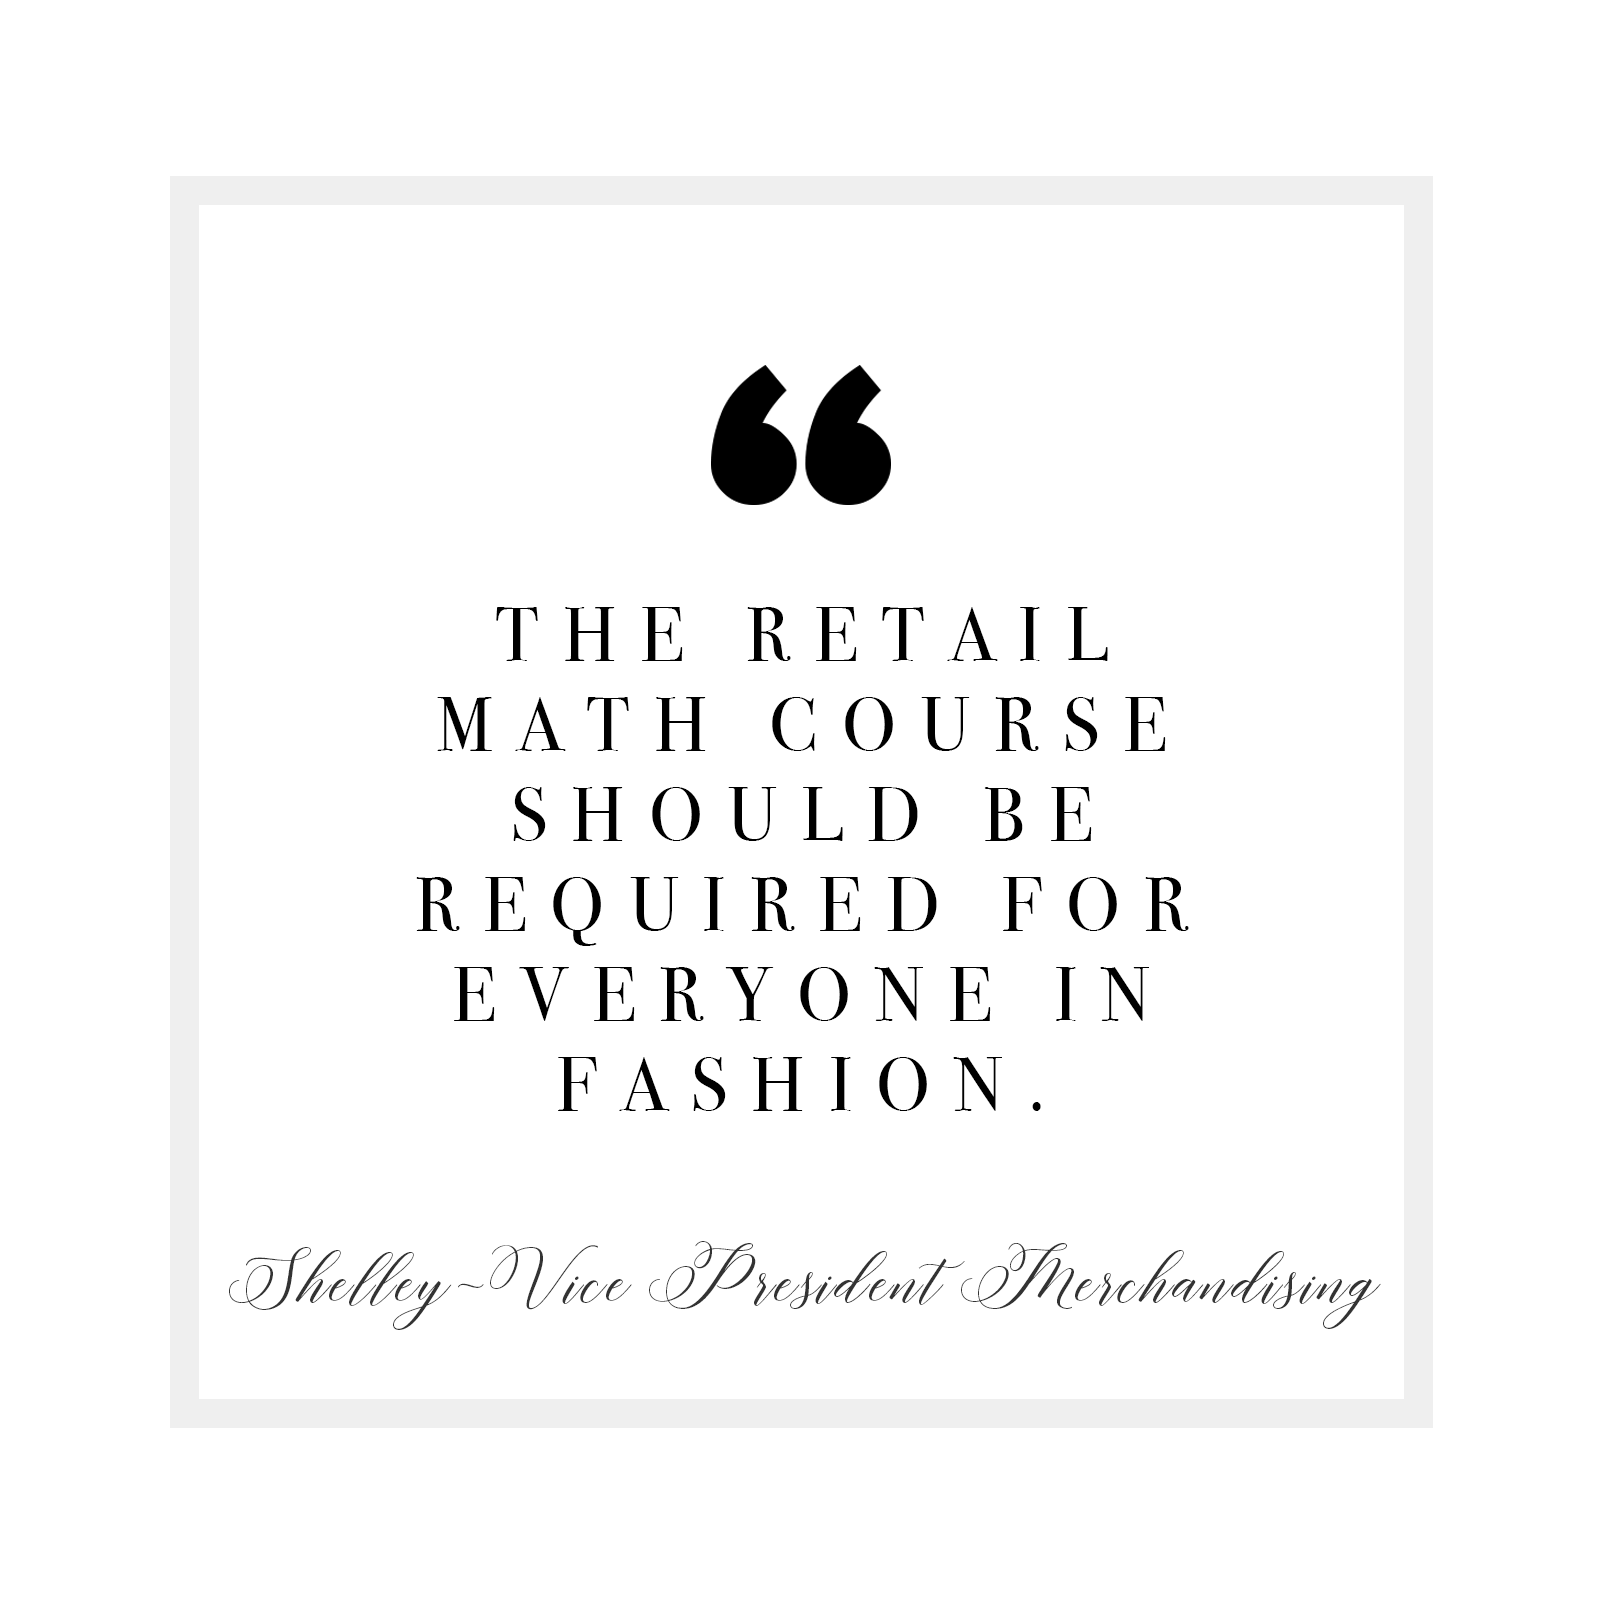 Retail Assembly online course success quotes and review - best online training - retail math.png